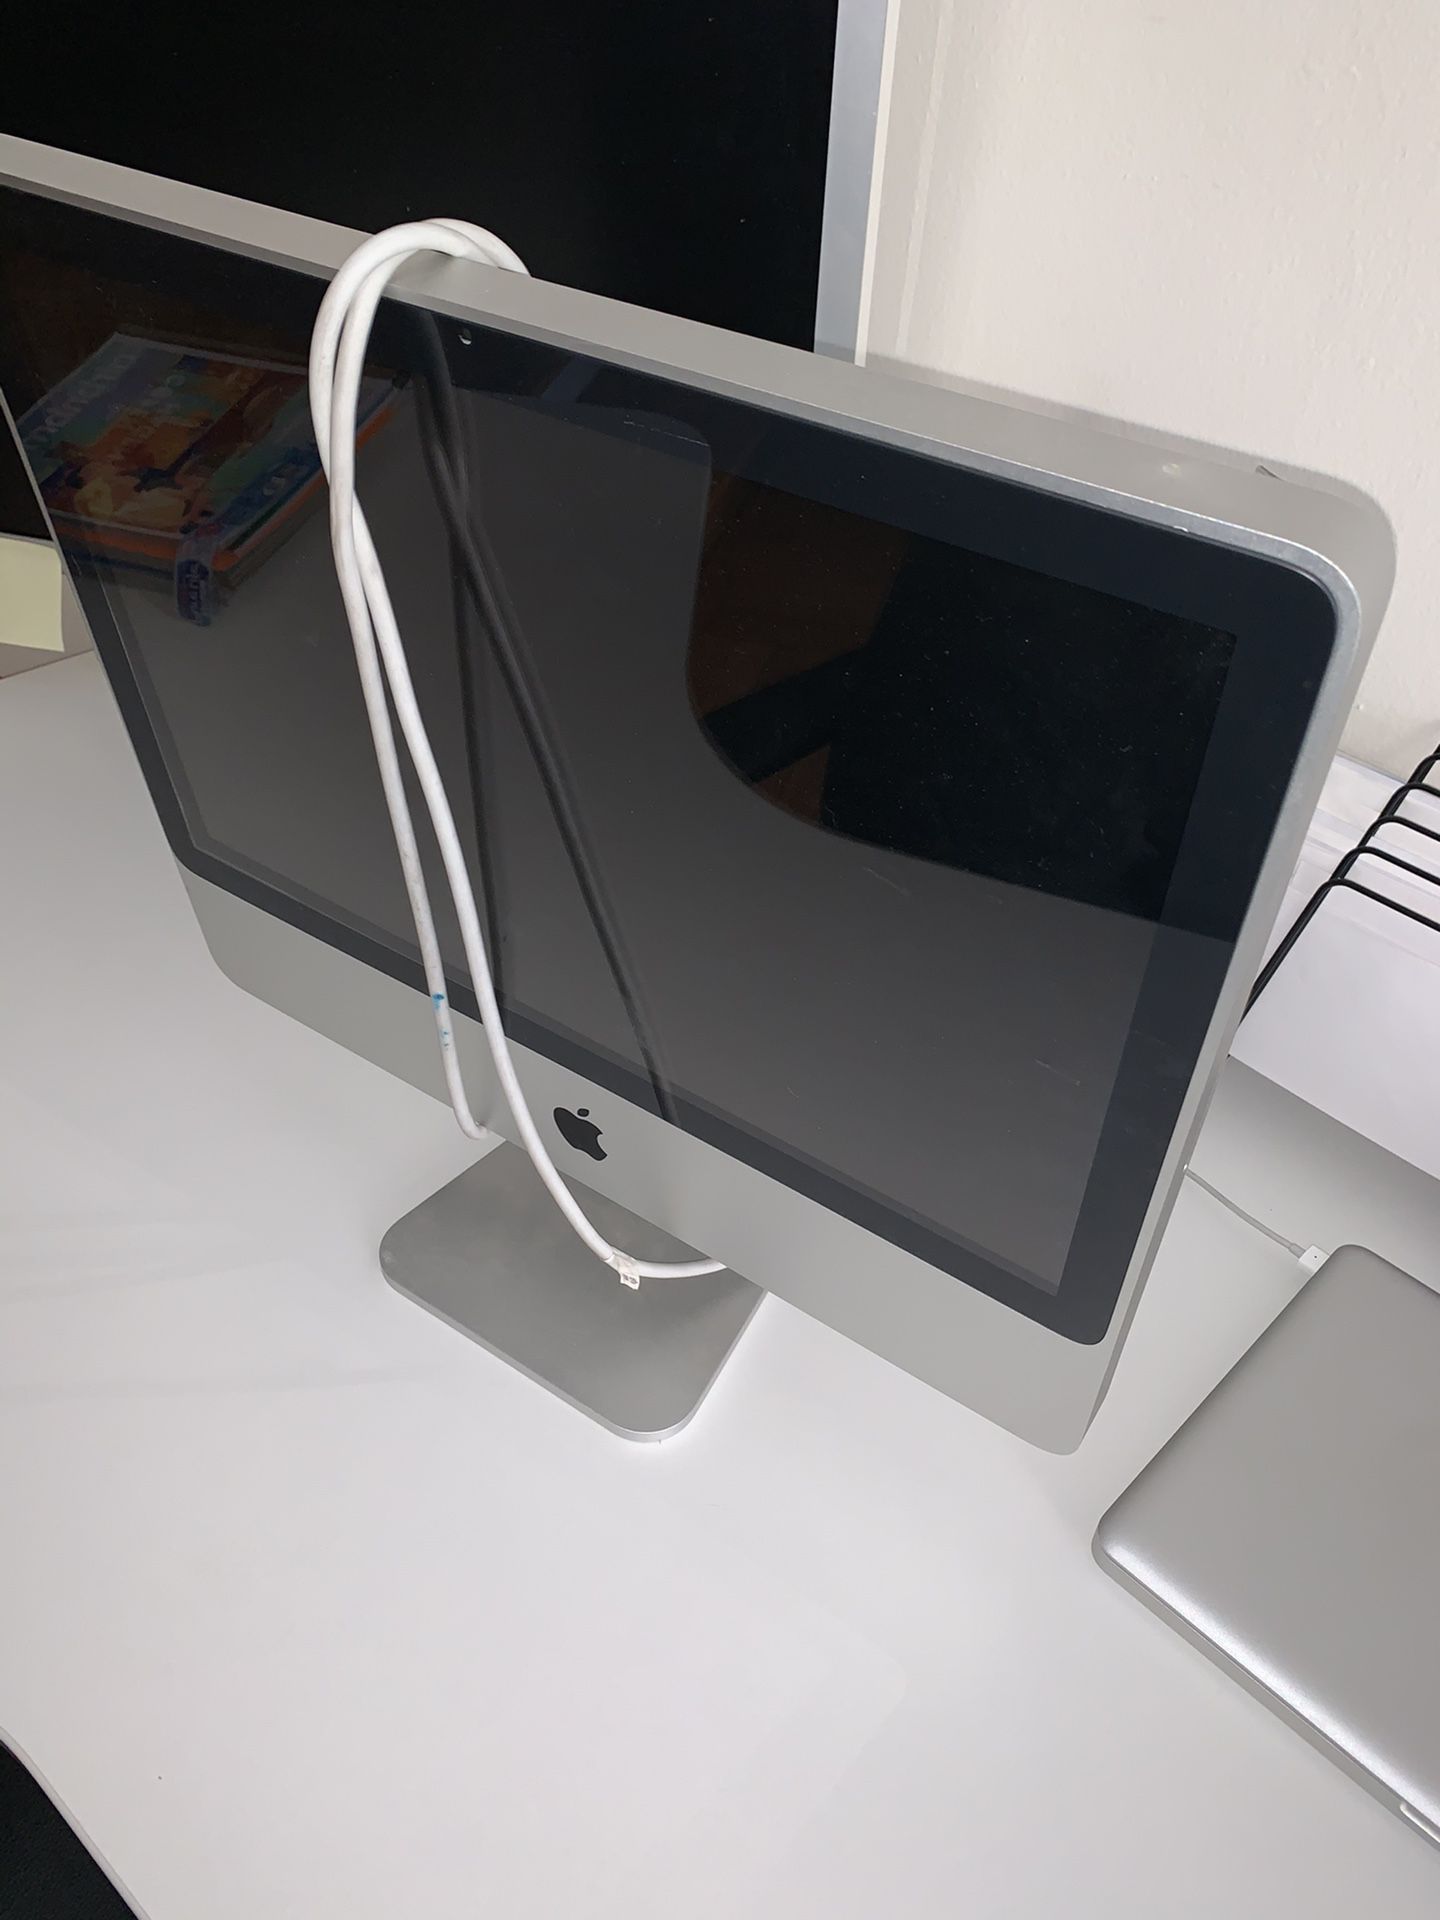 IMac computer (for parts only!) mid 2008